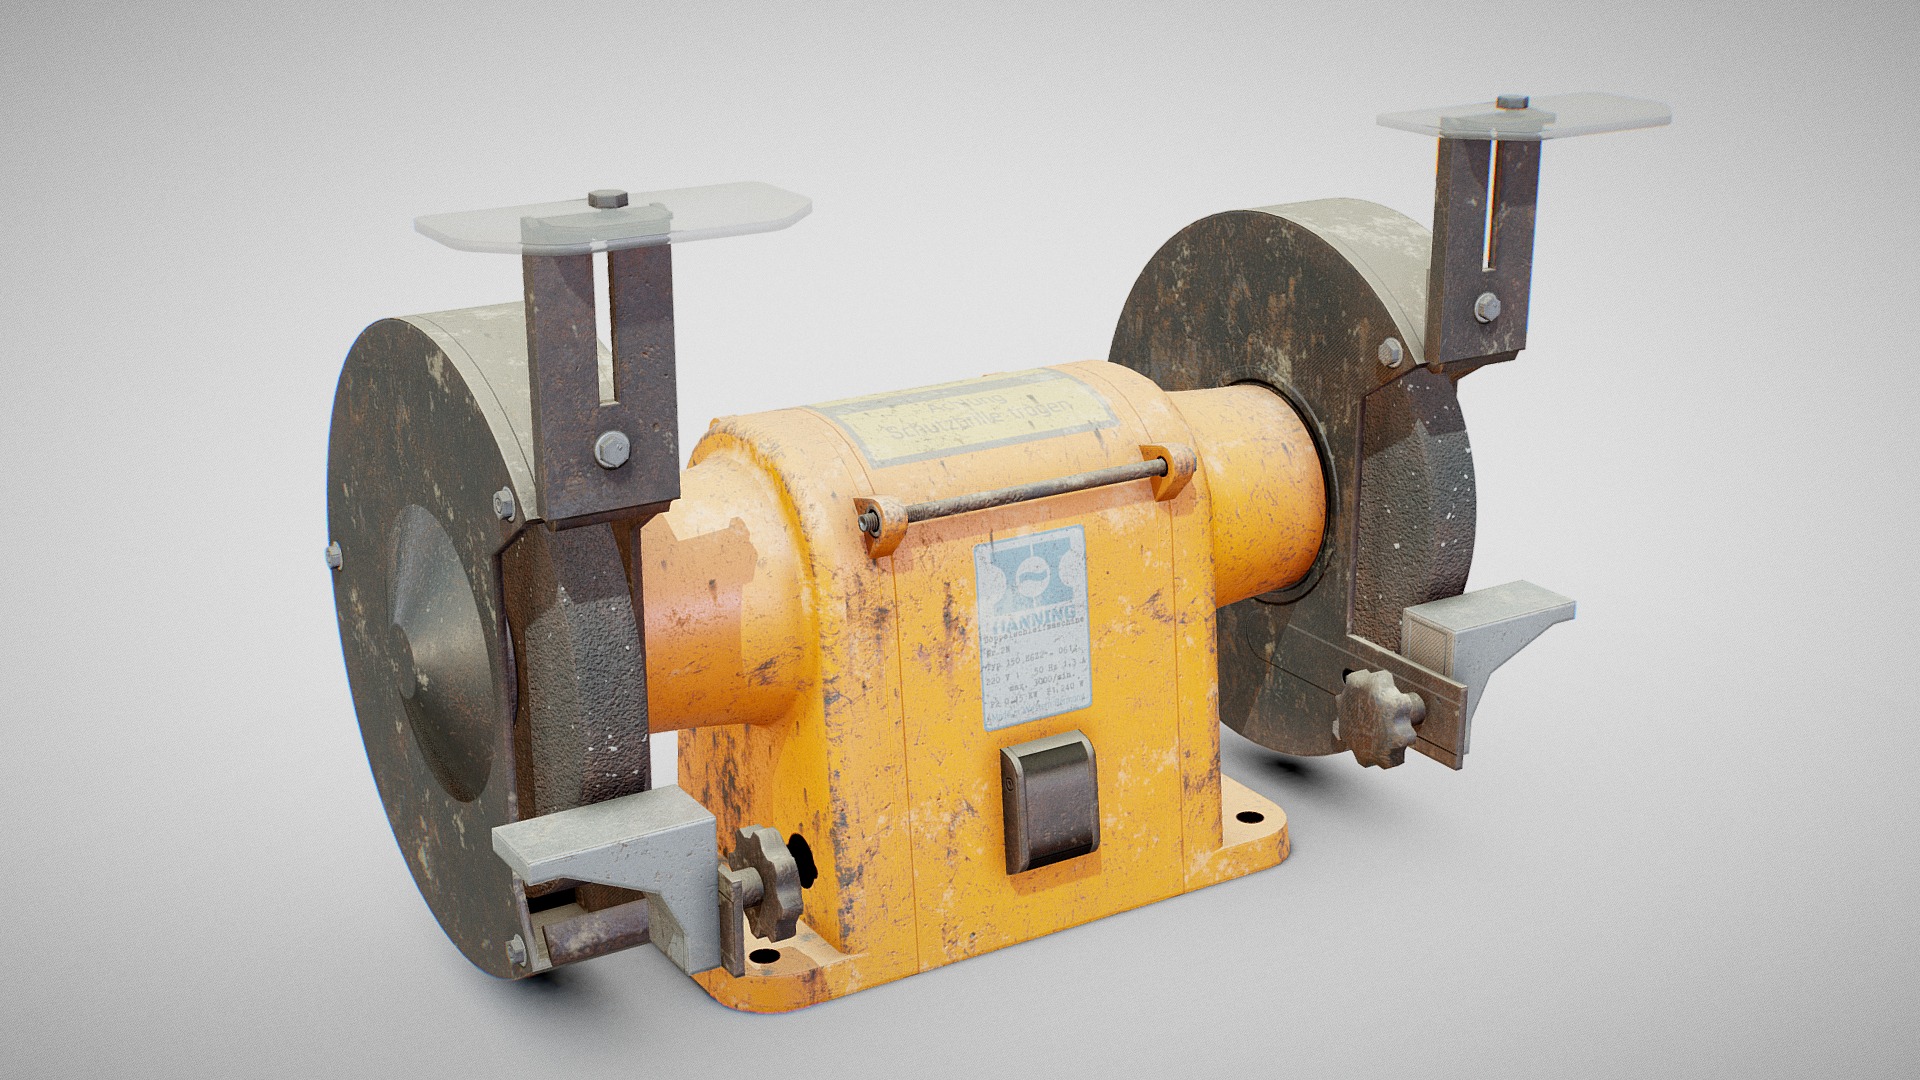 3D model Bench Grinder – Hanning E6Z2-061 (Dirty) - This is a 3D model of the Bench Grinder - Hanning E6Z2-061 (Dirty). The 3D model is about a yellow and black machine.